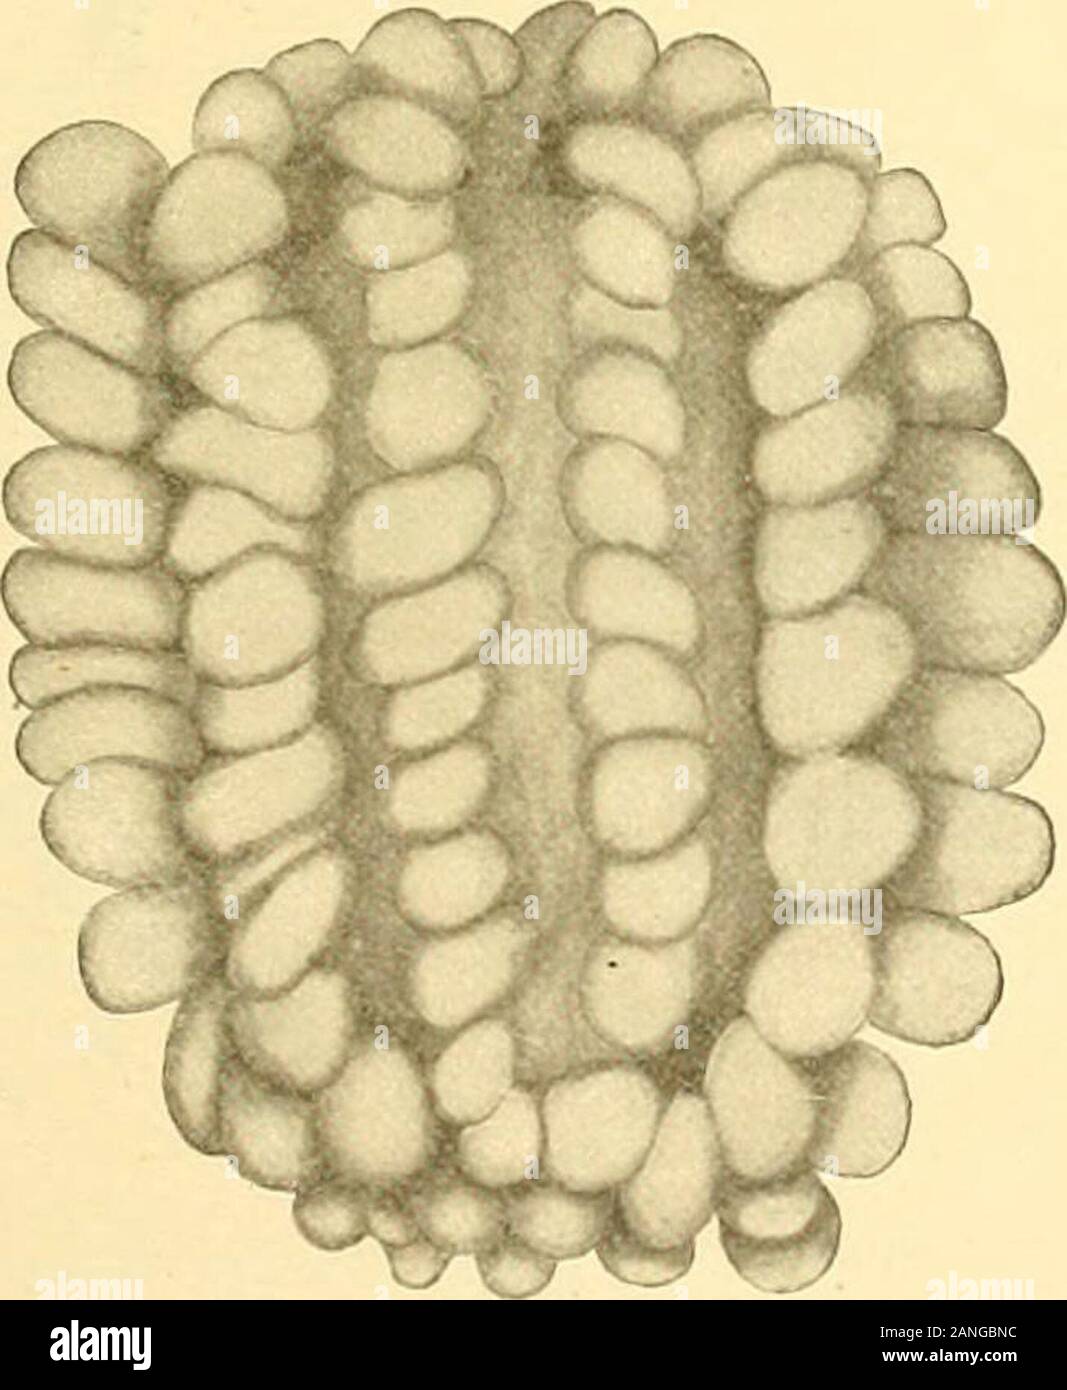 Bulletin of the Bureau of Fisheries . A single elustit i eggs ol Arguluu catosUvtm.(Actual size, 0.15x0.3mm.). A single egg of Argulua catostnmi, 300. Argulus funduli Kroyer. Male and female known. Carapace orbicular, wider than long, seareeh covering the second pair of swimming legs; posteriorsinus wide and shallow, widely cut at its base; eves large and placed far forward, chitin rings in lateralareas nearly equal. On the ventral surface the anterior portion is covered with stunt spines, while thewhole thorax is papillated. Abdomen long elliptical, cut nearly to the center in the female, abo Stock Photo